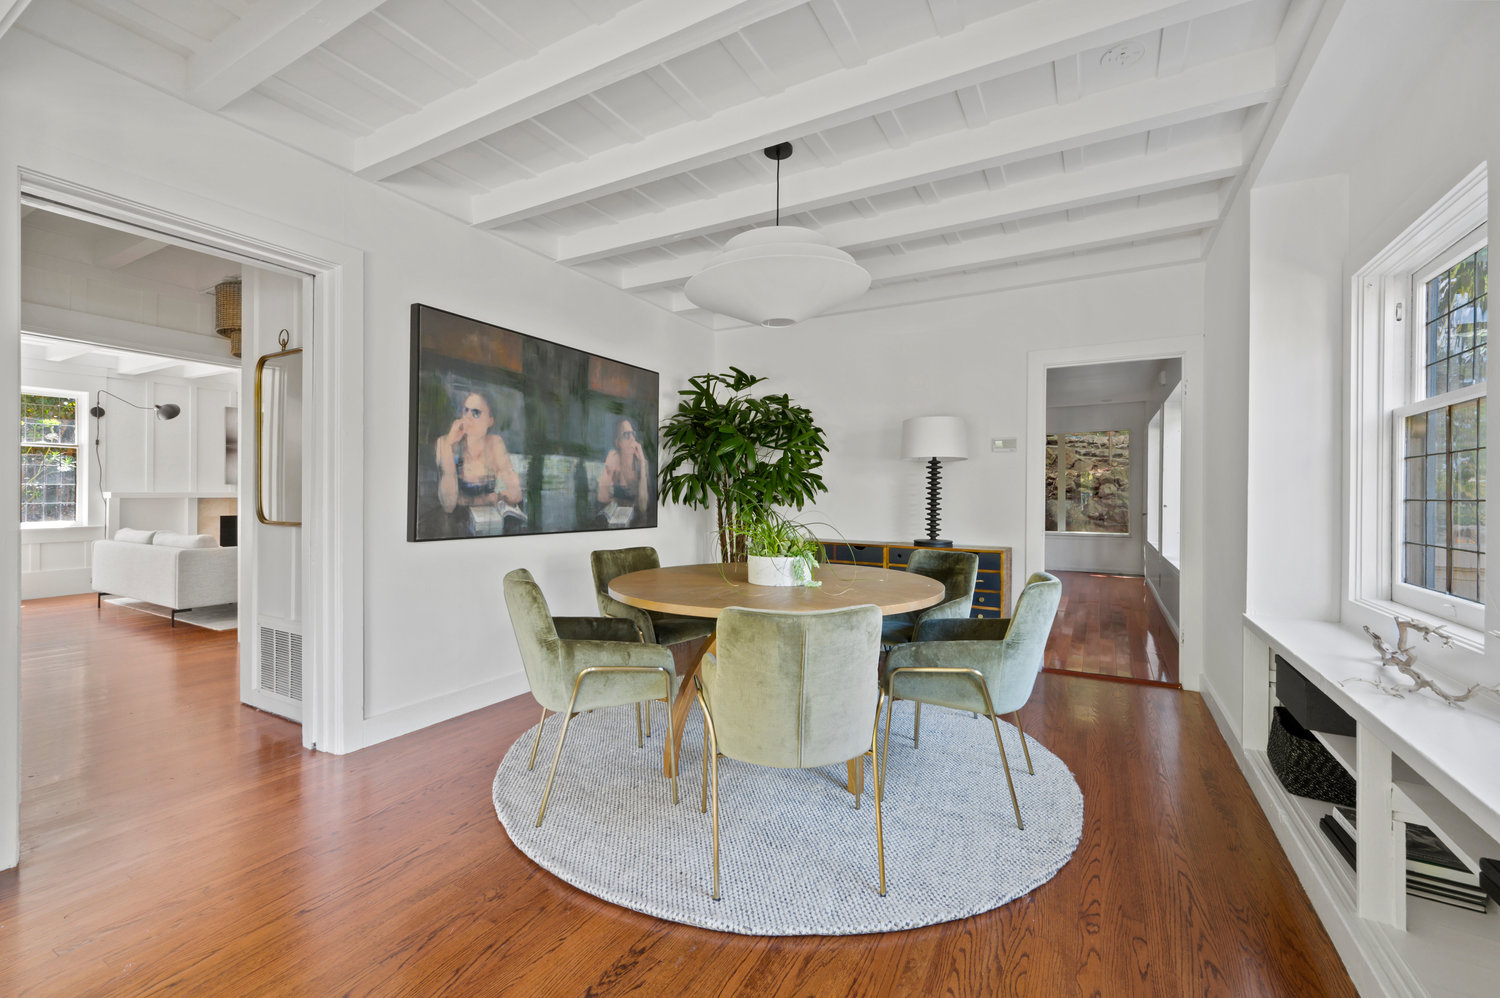 Property Photo: Dining area with lovely large round table. Main entry is doorway to the left. 